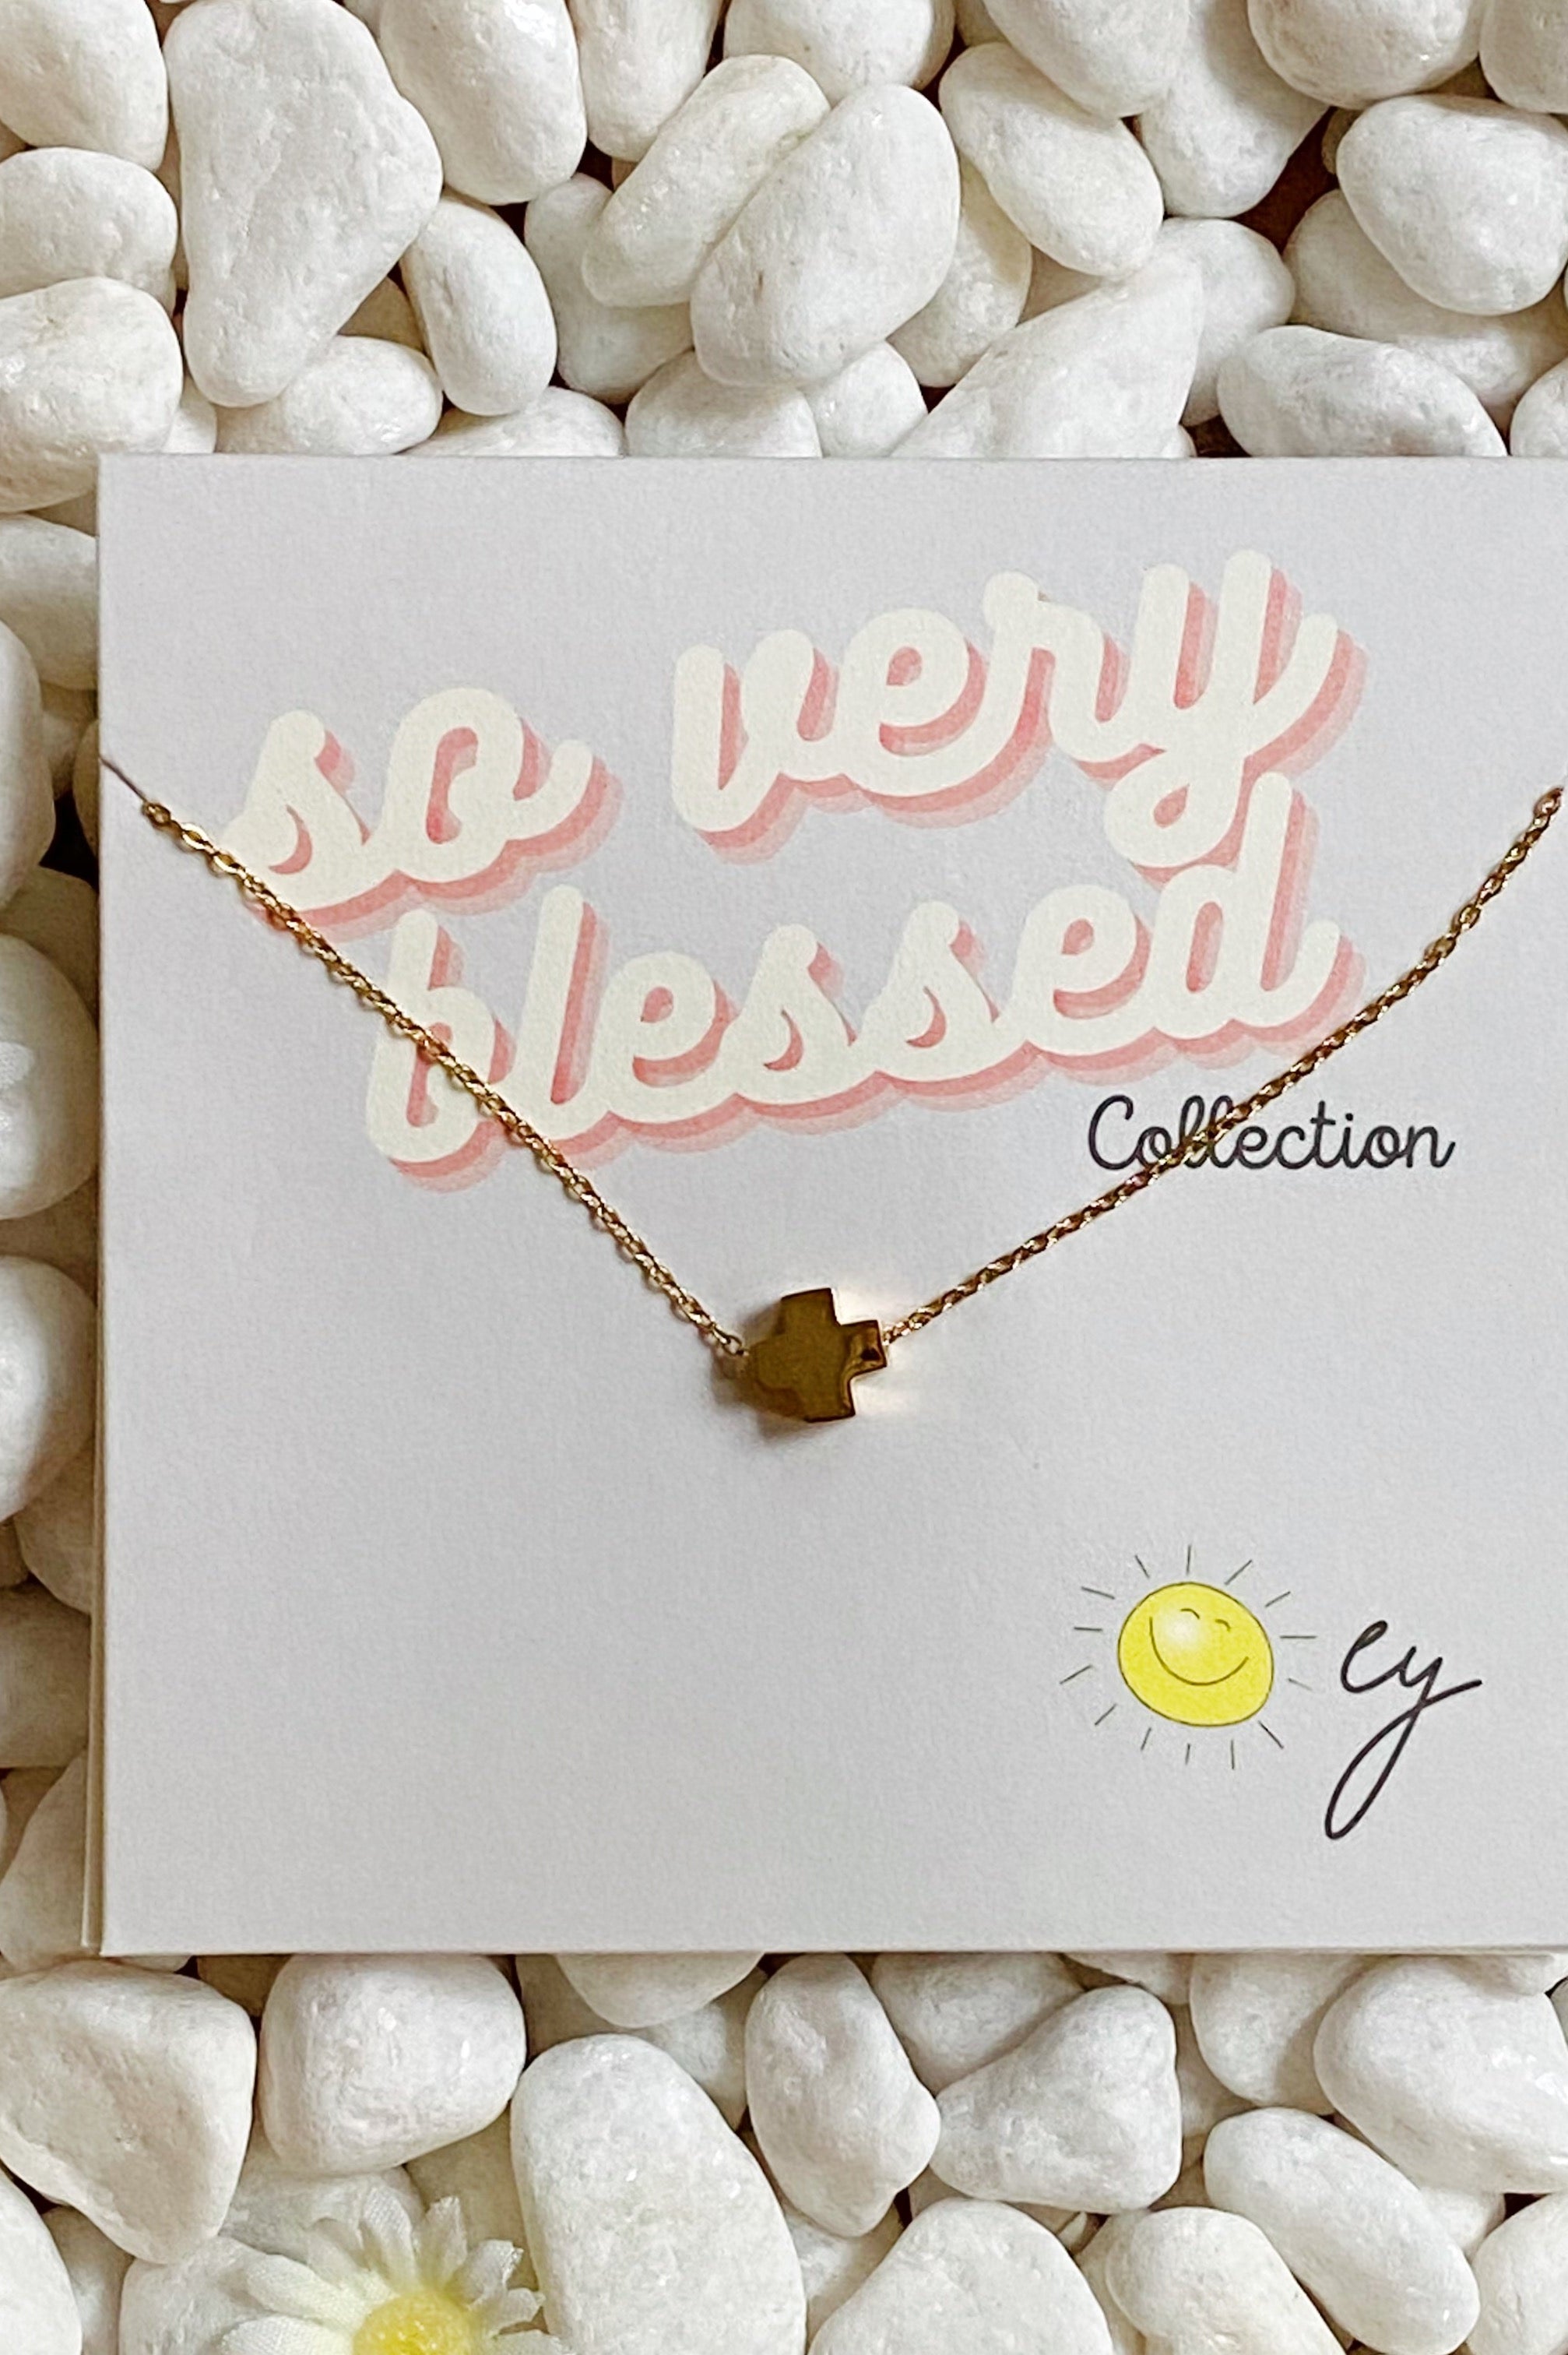 So Very Blessed Cross Necklace Ellisonyoung.com